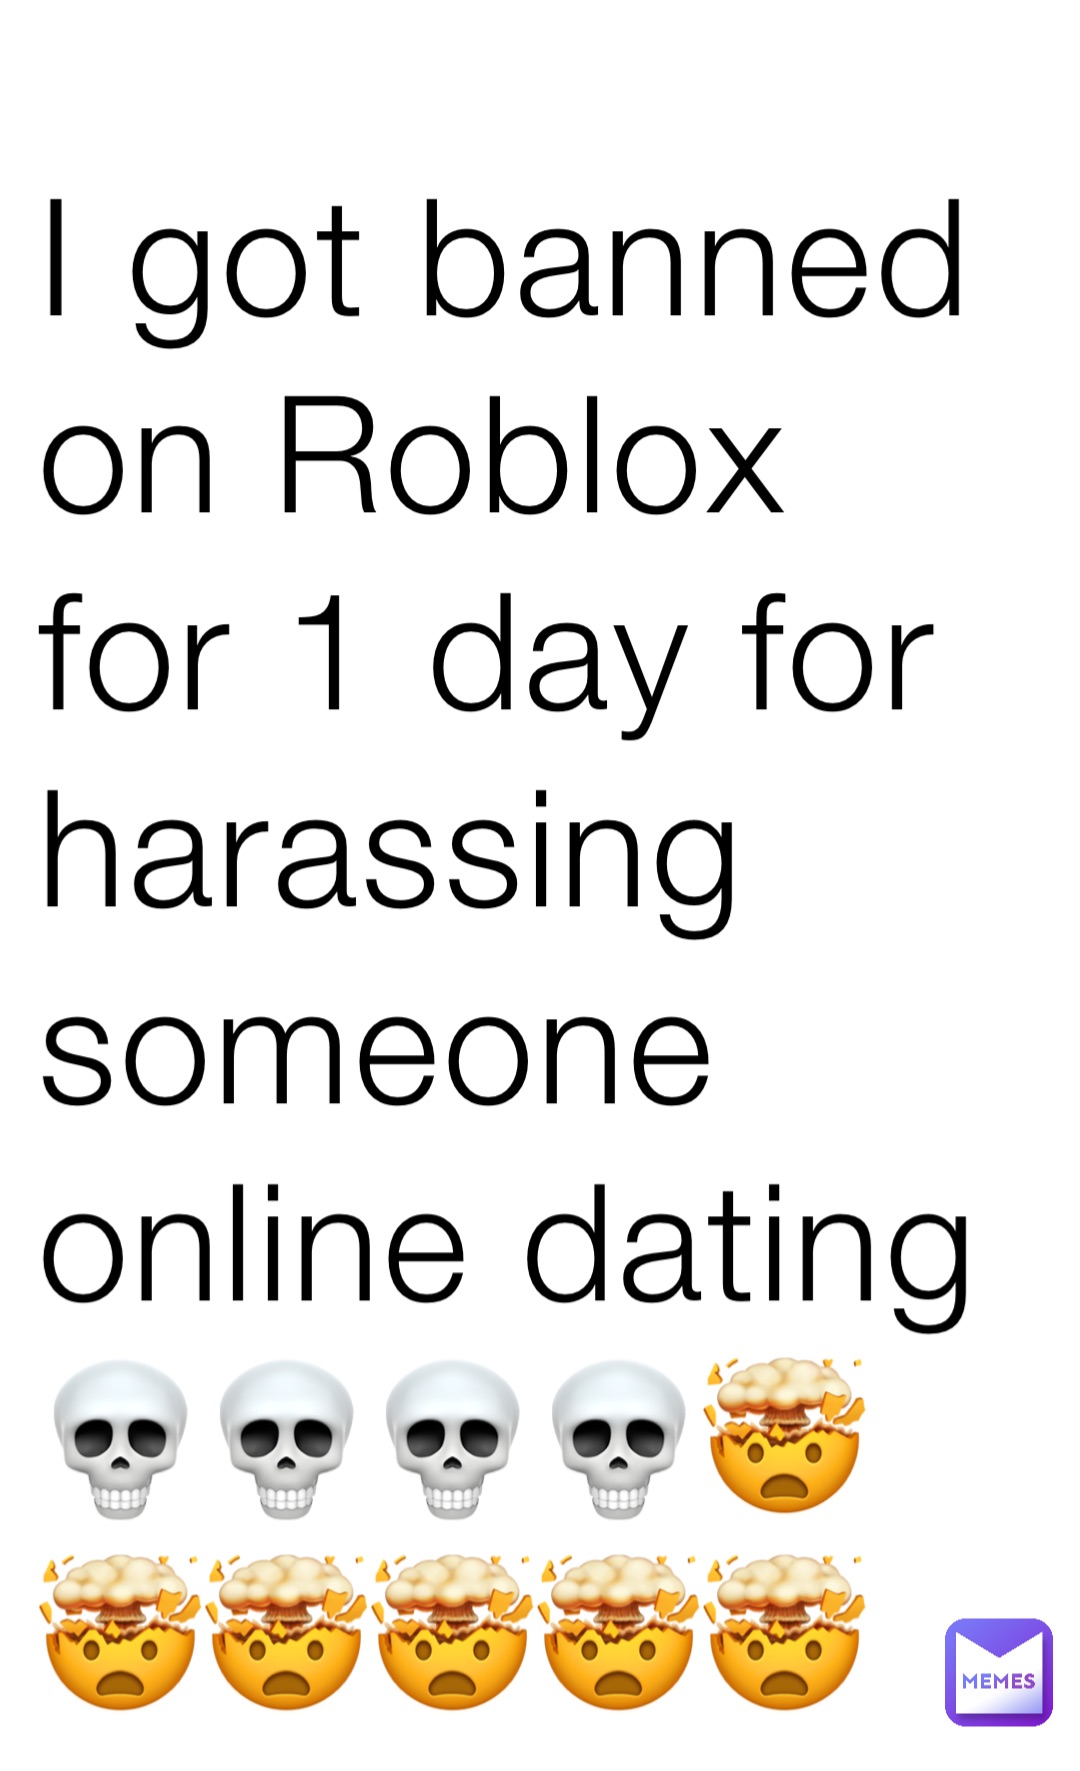 I got banned on Roblox for 1 day for harassing someone online dating💀💀💀💀🤯🤯🤯🤯🤯🤯